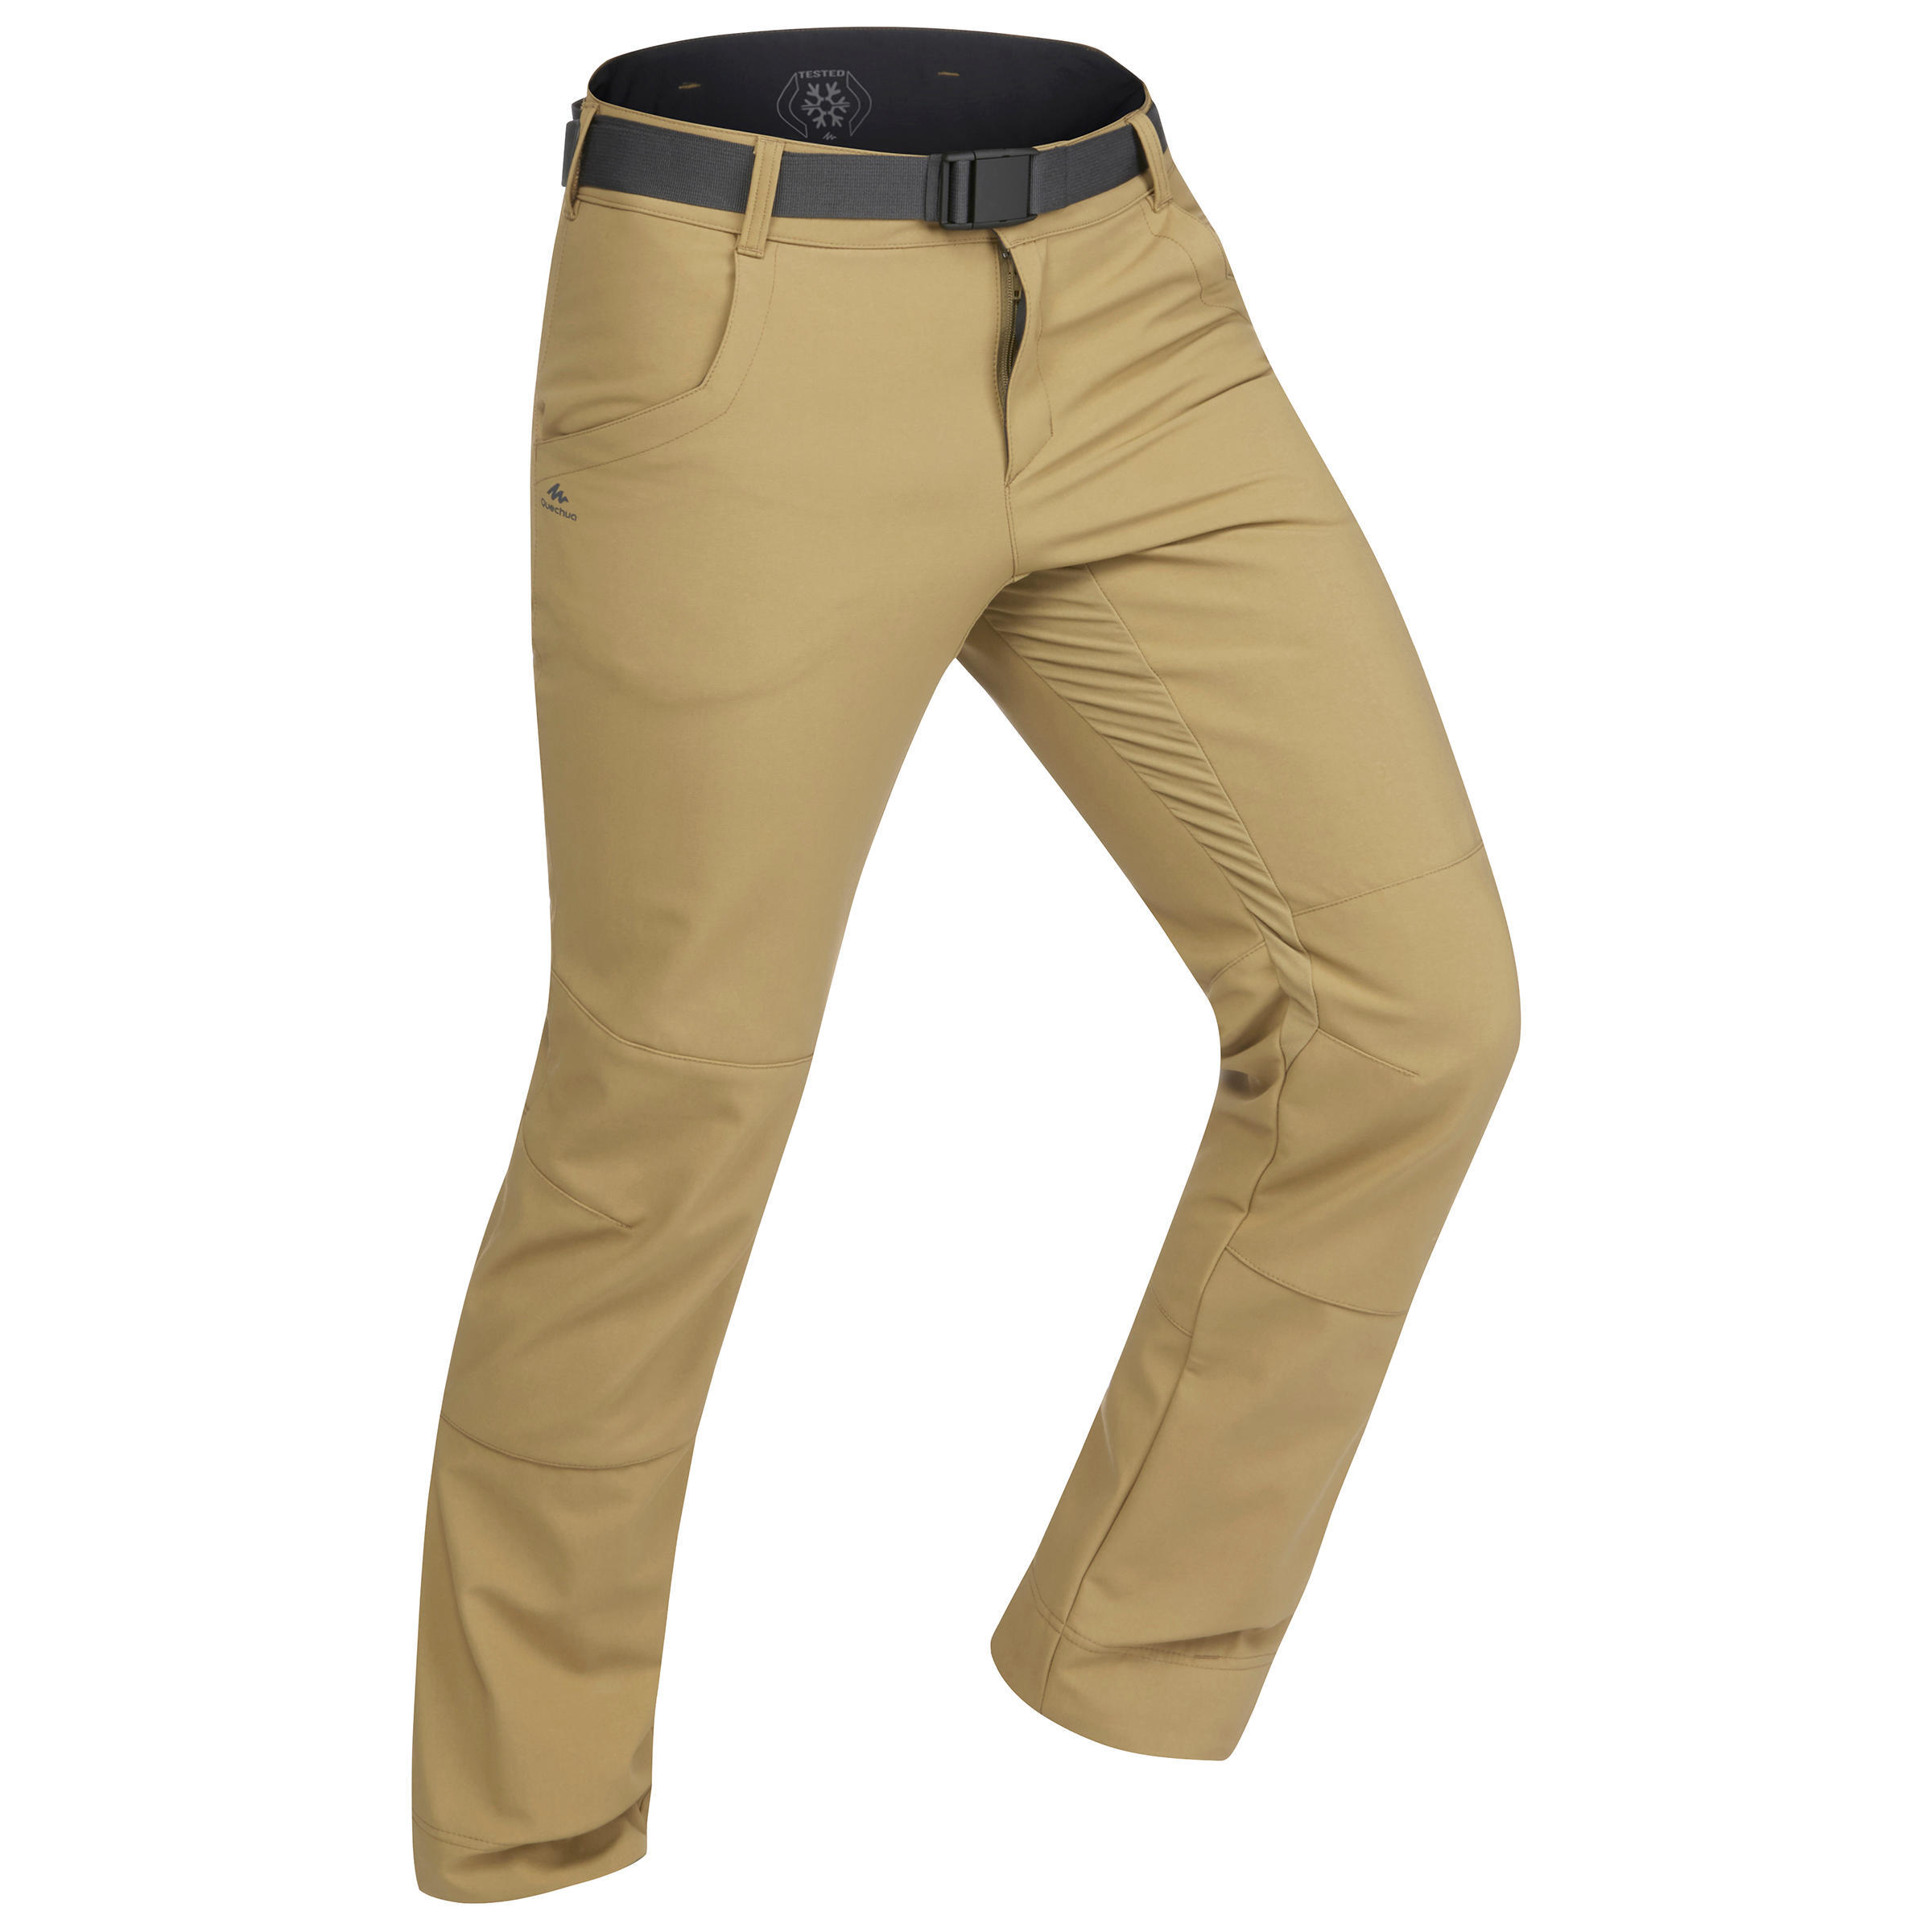 MEN'S WARM WATER-REPELLENT HIKING TROUSERS - SH500 4/9